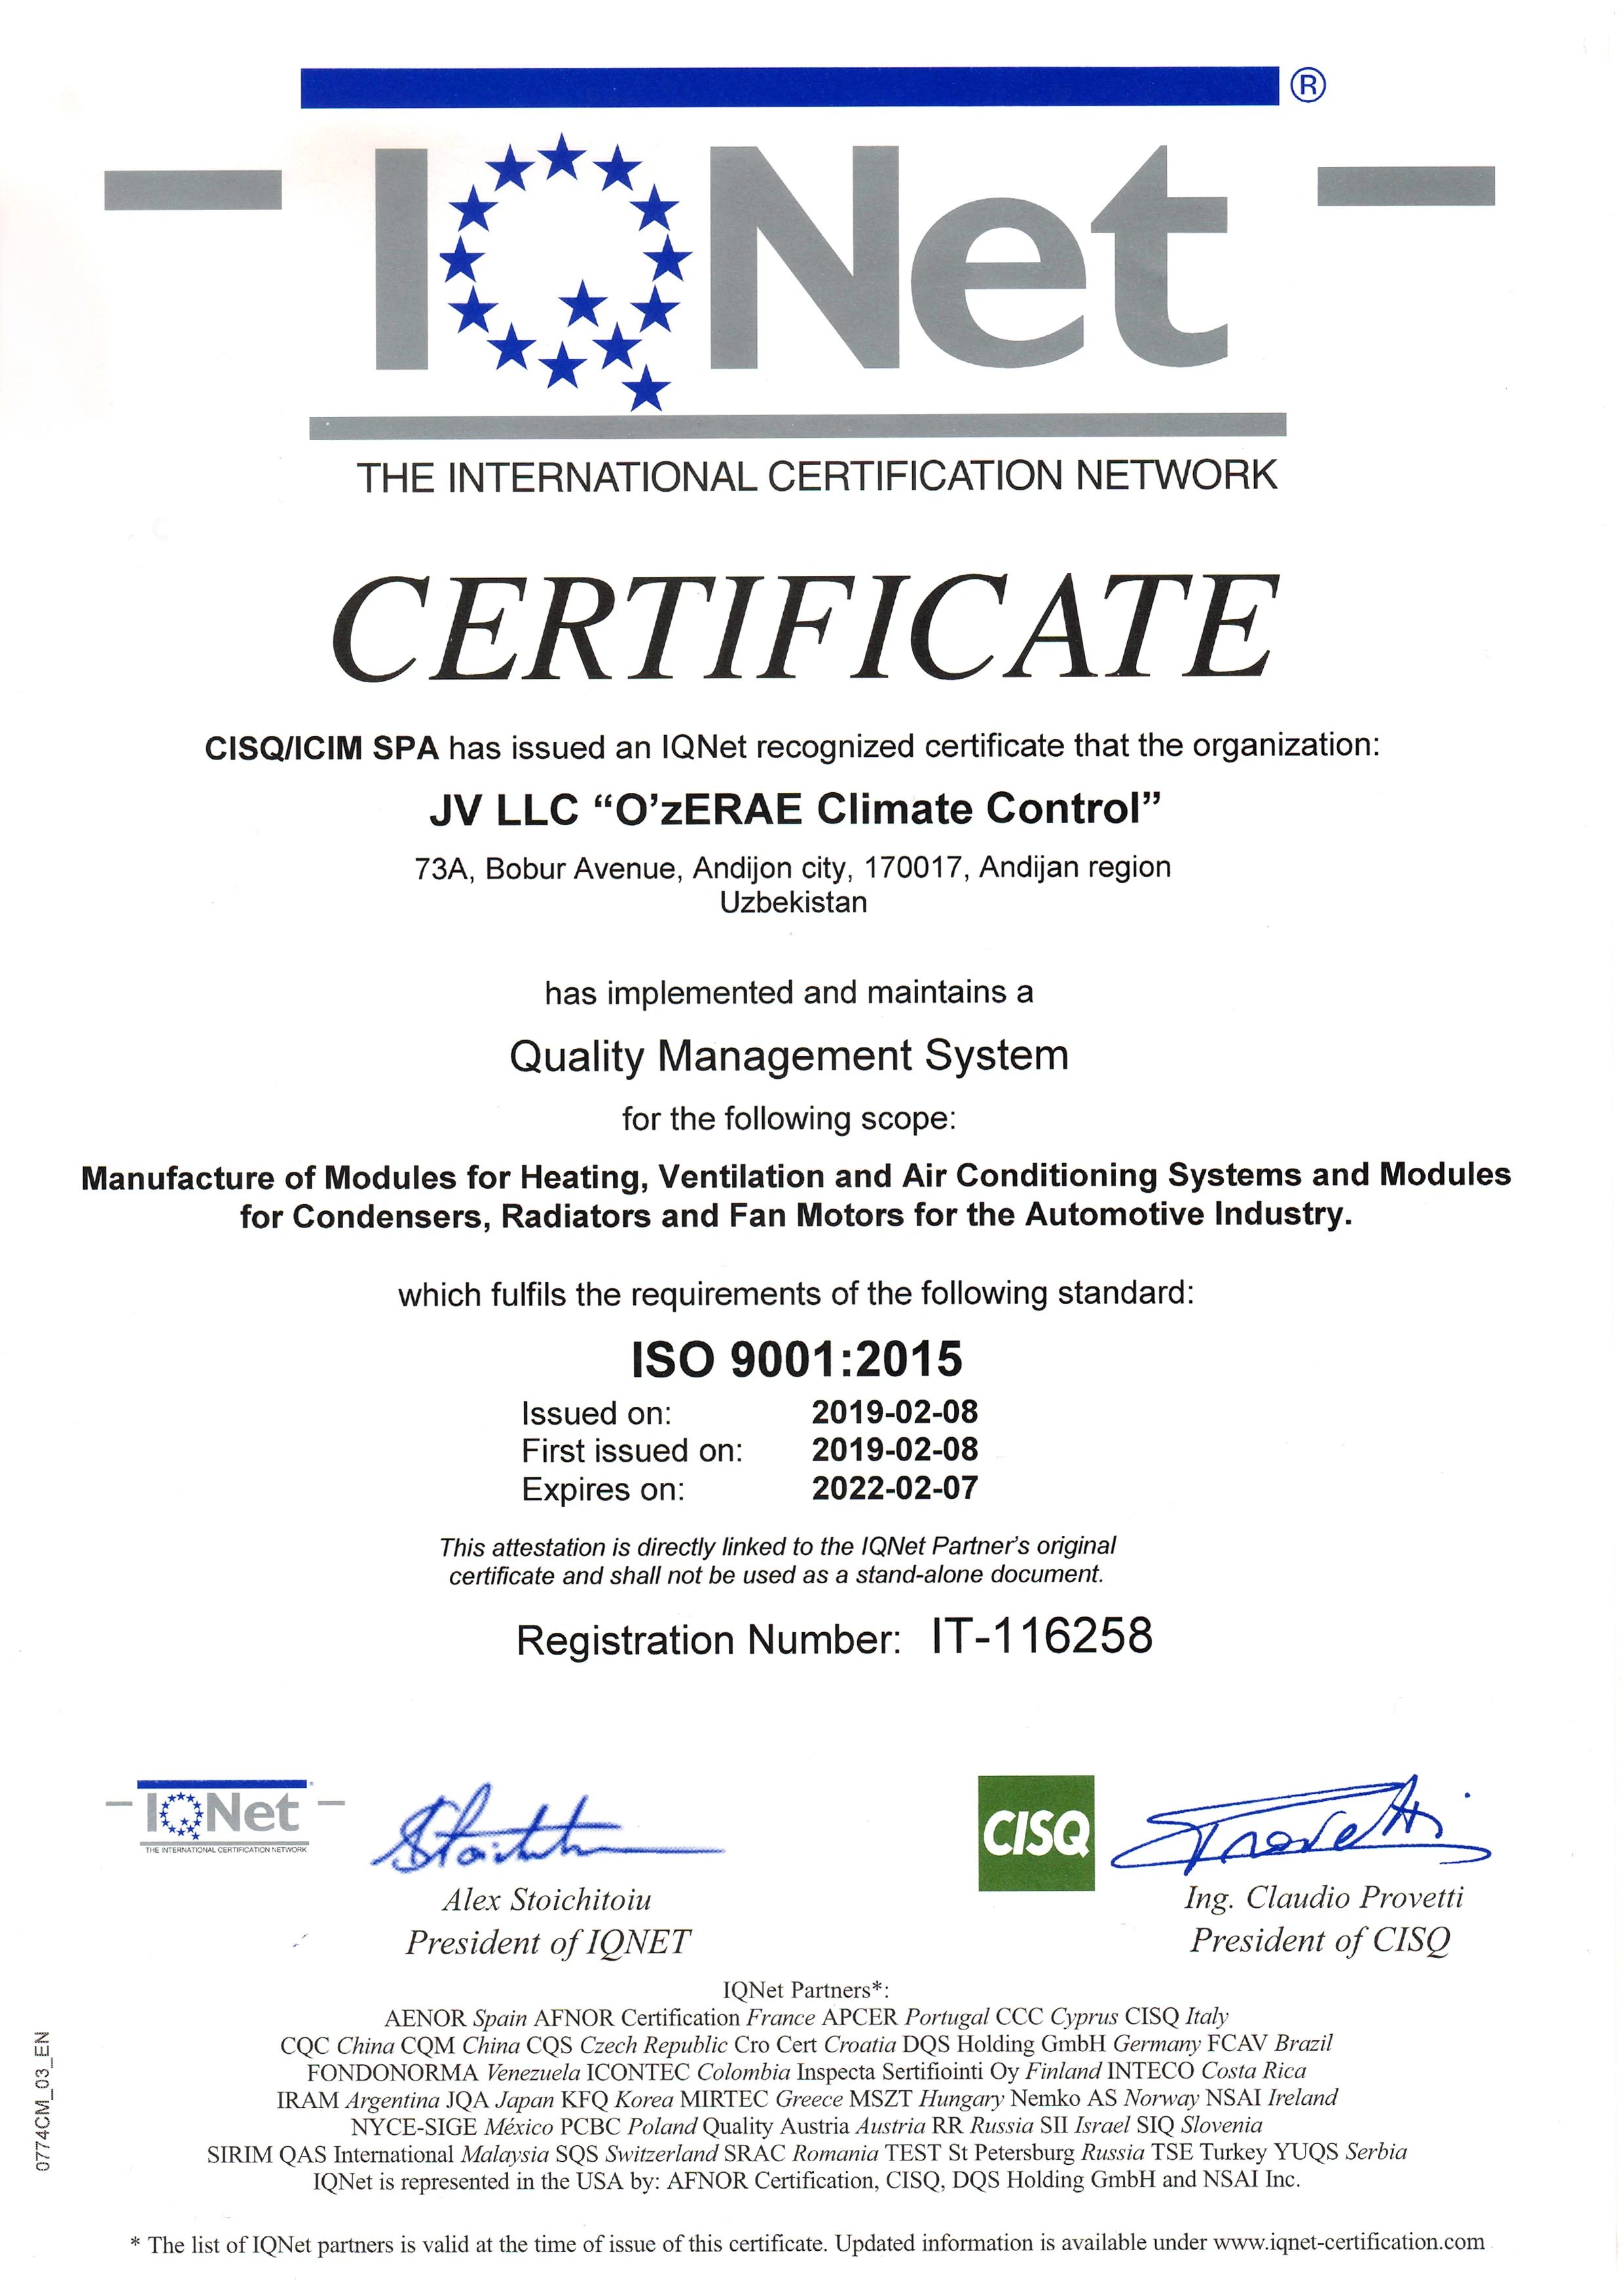 THE CERTIFICATION BODY FOR MANAGEMENT SYSTEMS "DQS QUALITY SYSTEMS" HAS SUCCESSFULLY CONDUCTED A CERTIFICATION AUDIT.